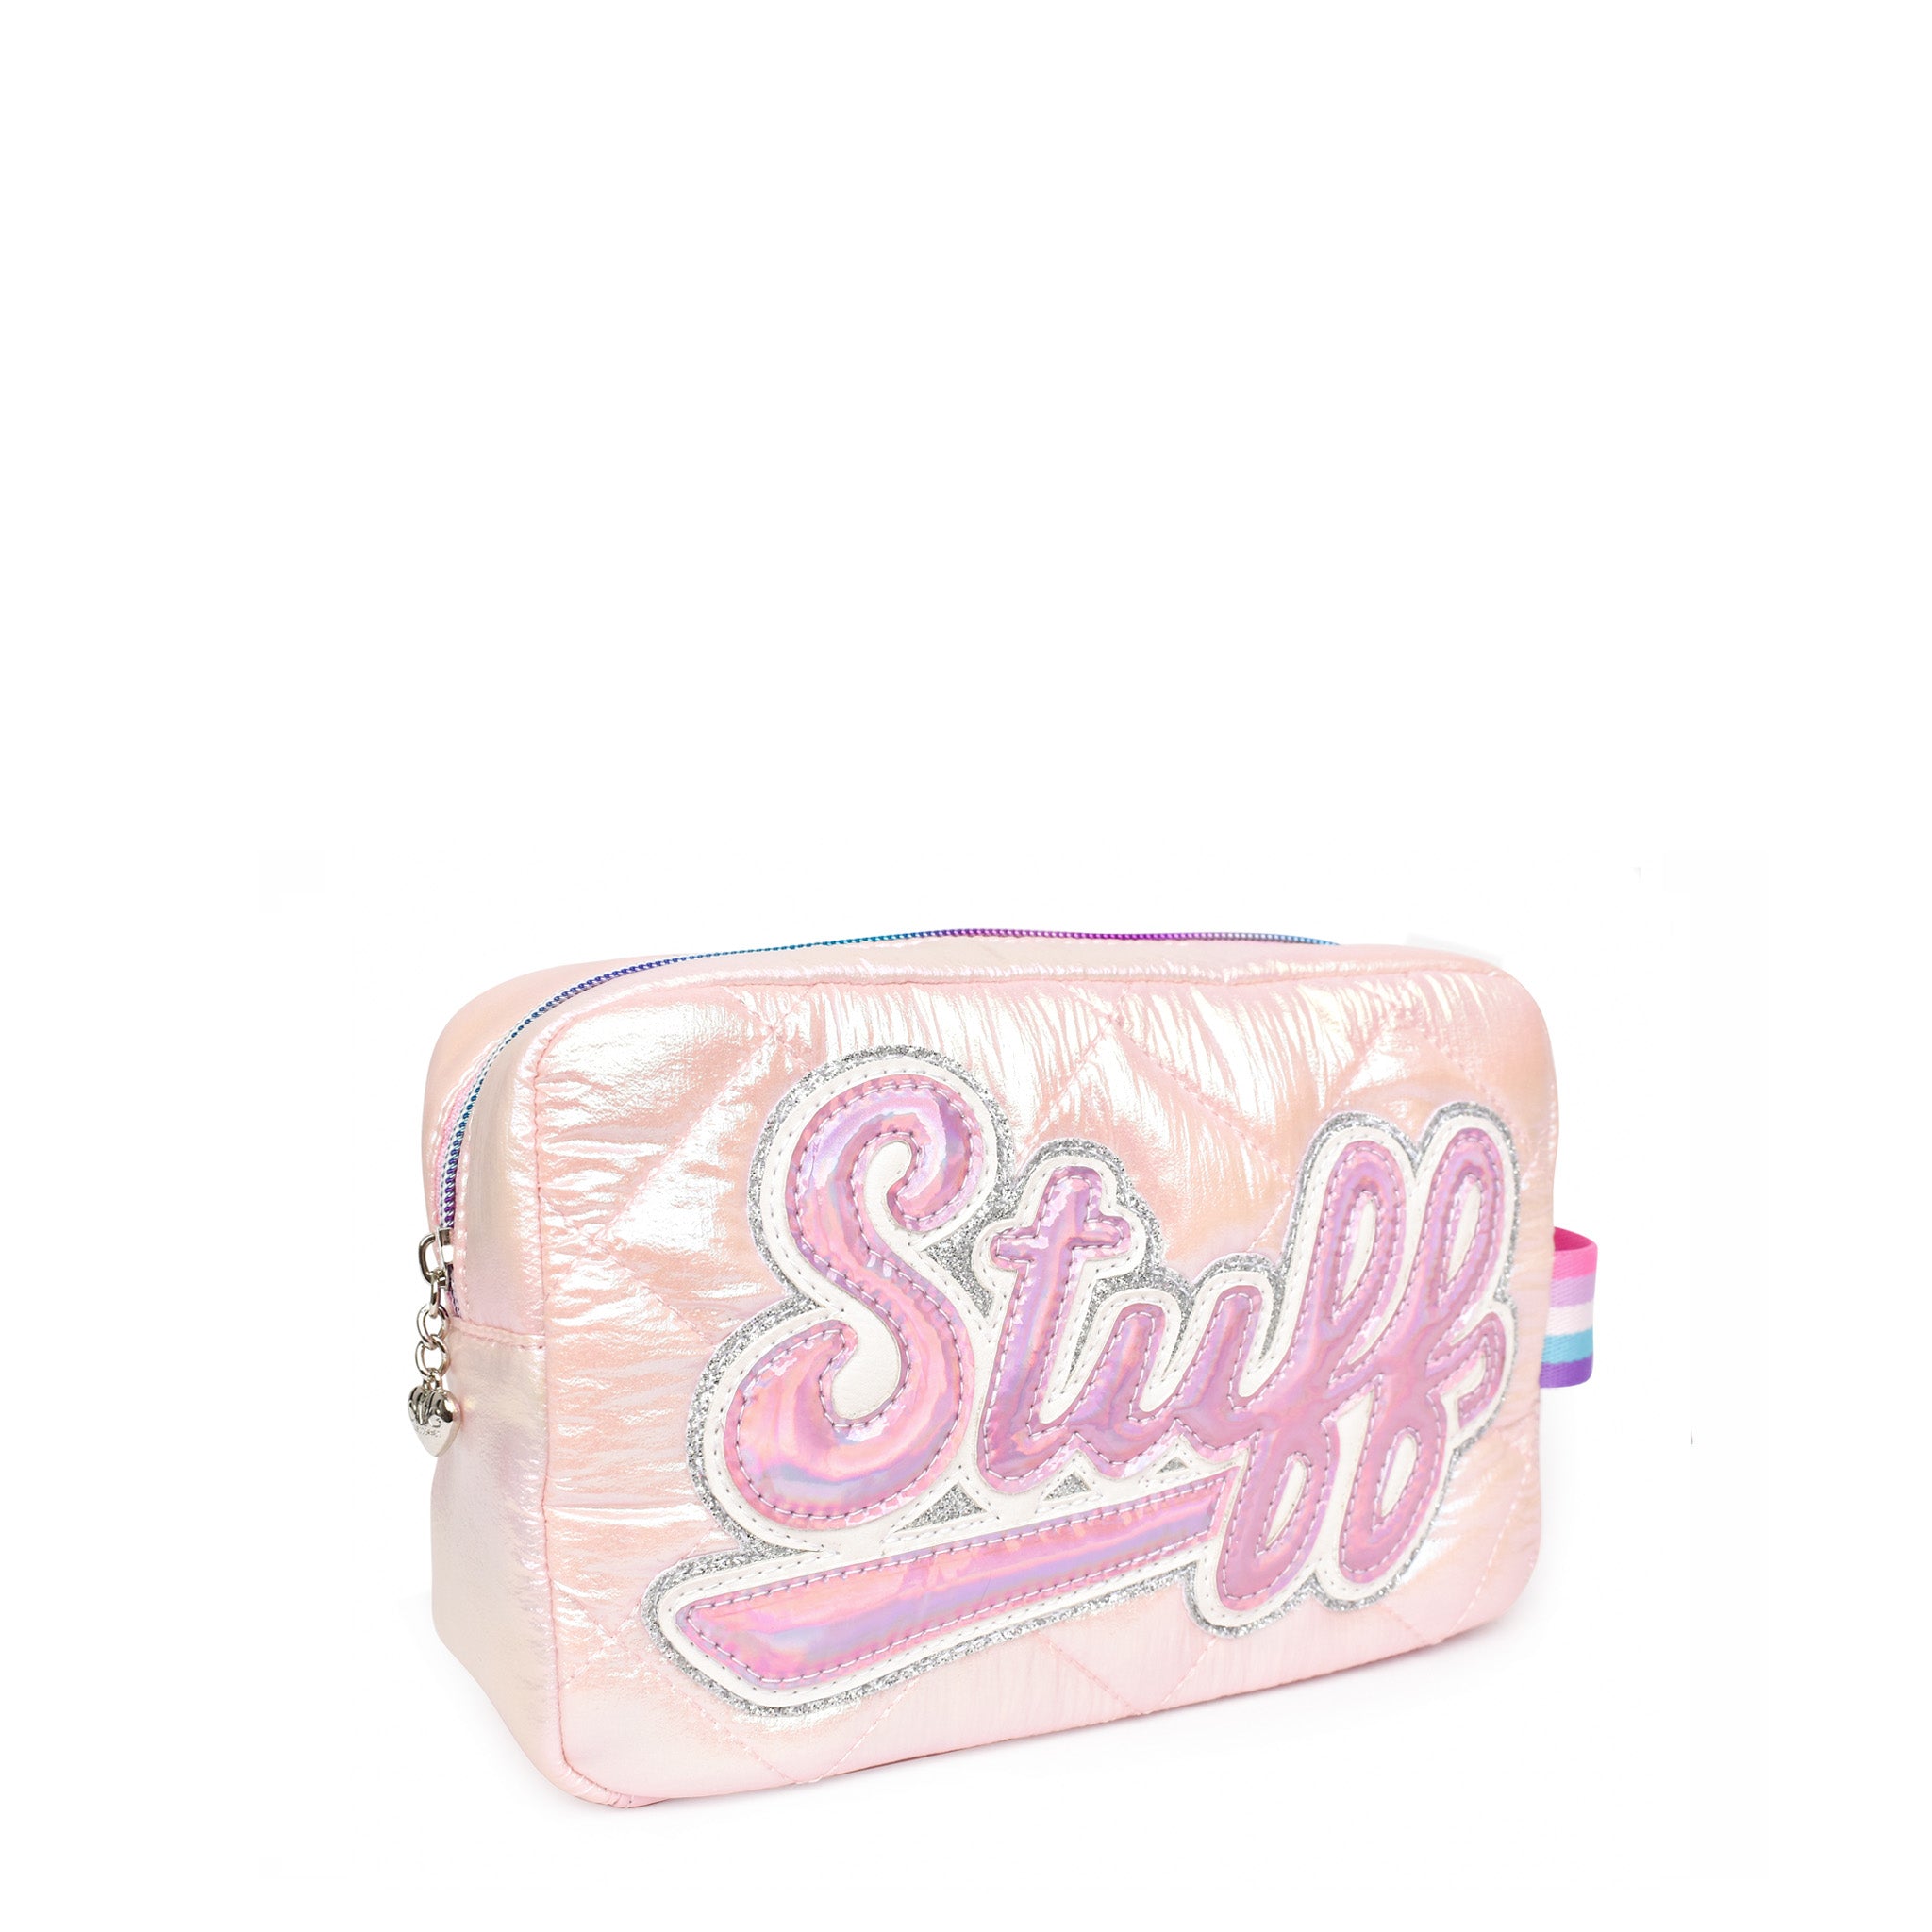 Side view of pink puffer metallic pouch with 'Stuff' retro script patch